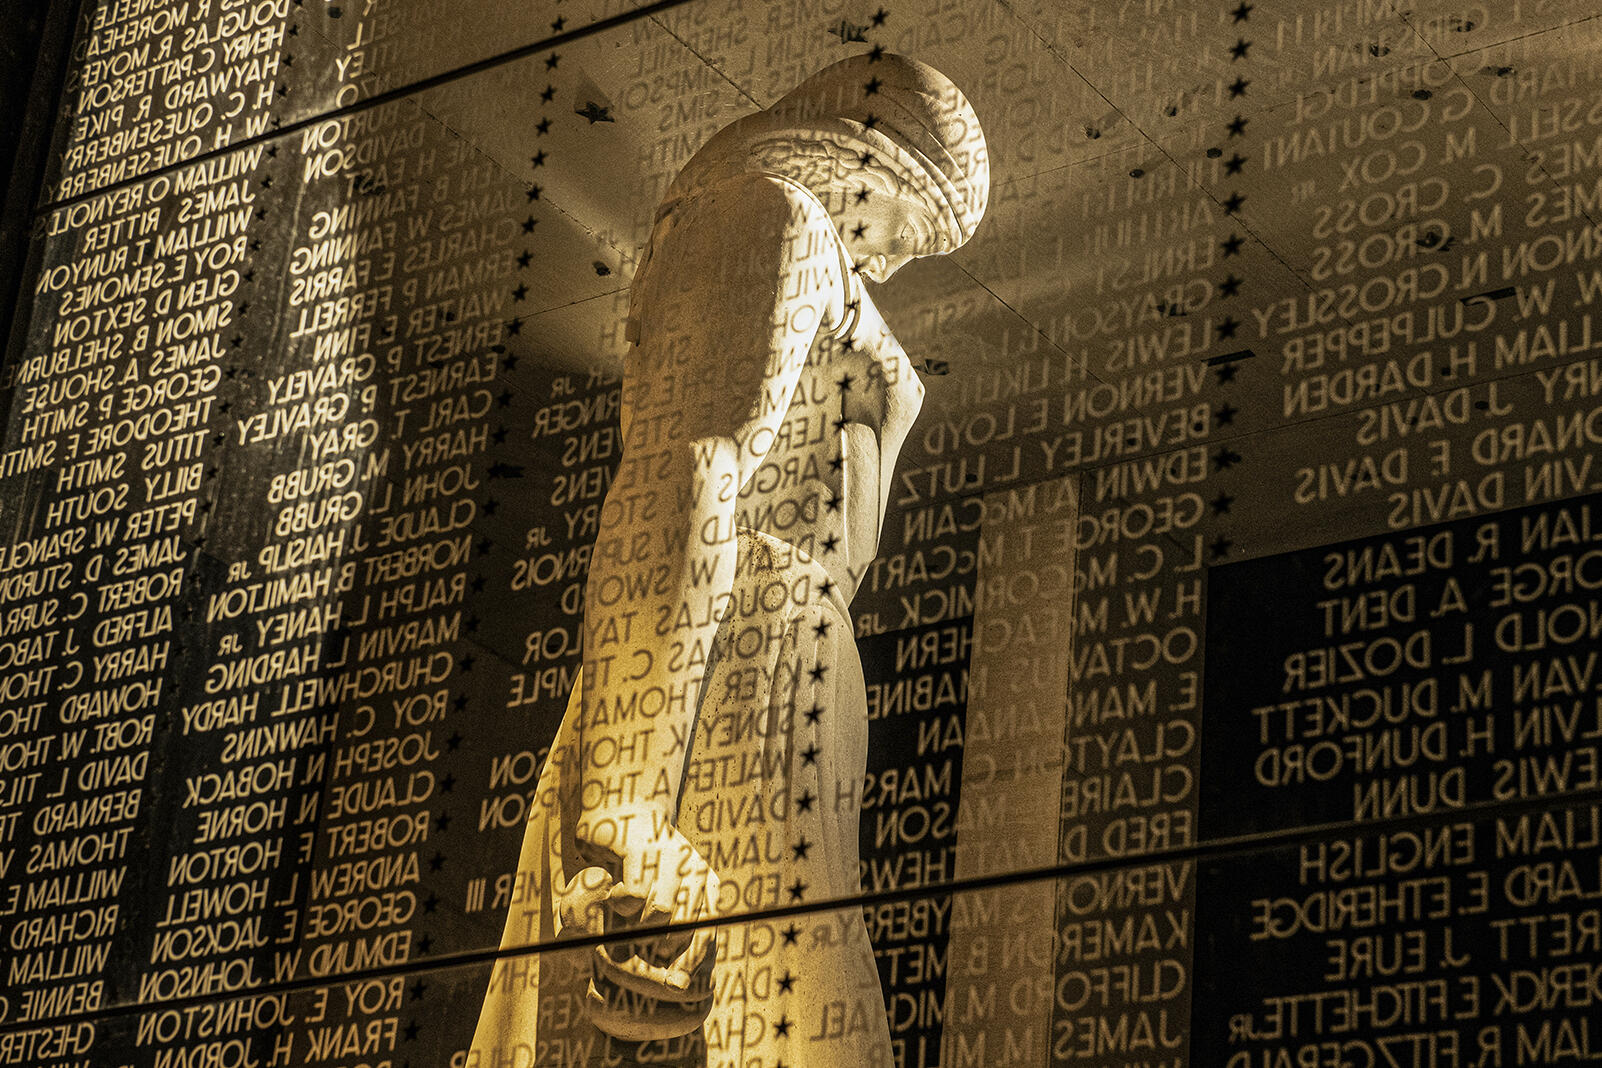 The names of 1,303 Virginians killed in the Vietnam War are engraved on the Virginia War Memorial's Shrine of Memory.